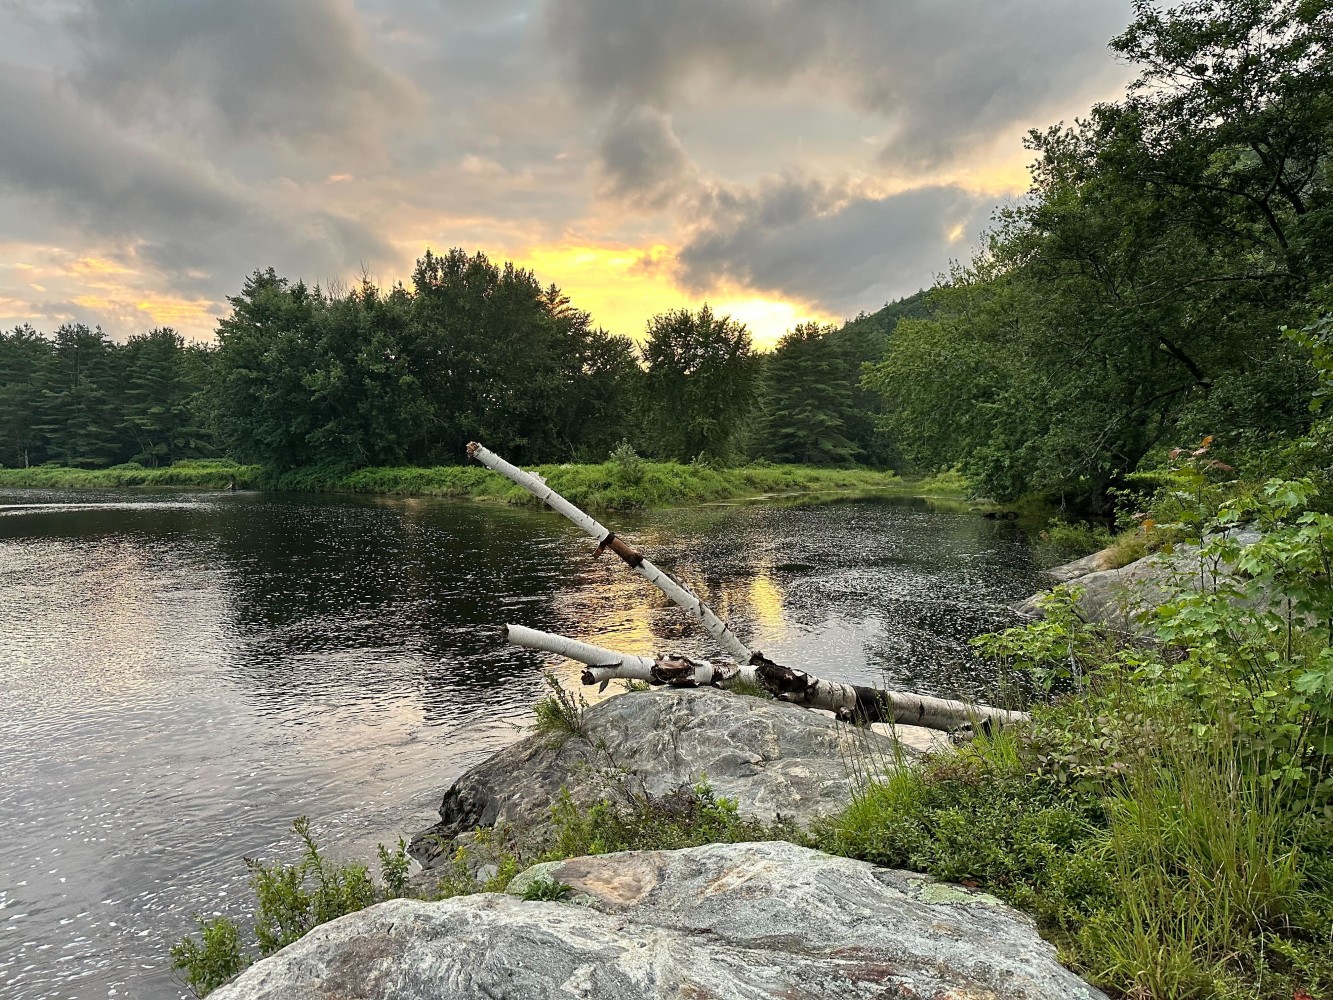 Image of rocks and a dead tree hanging over the Androscoggin River in Gilead Maine